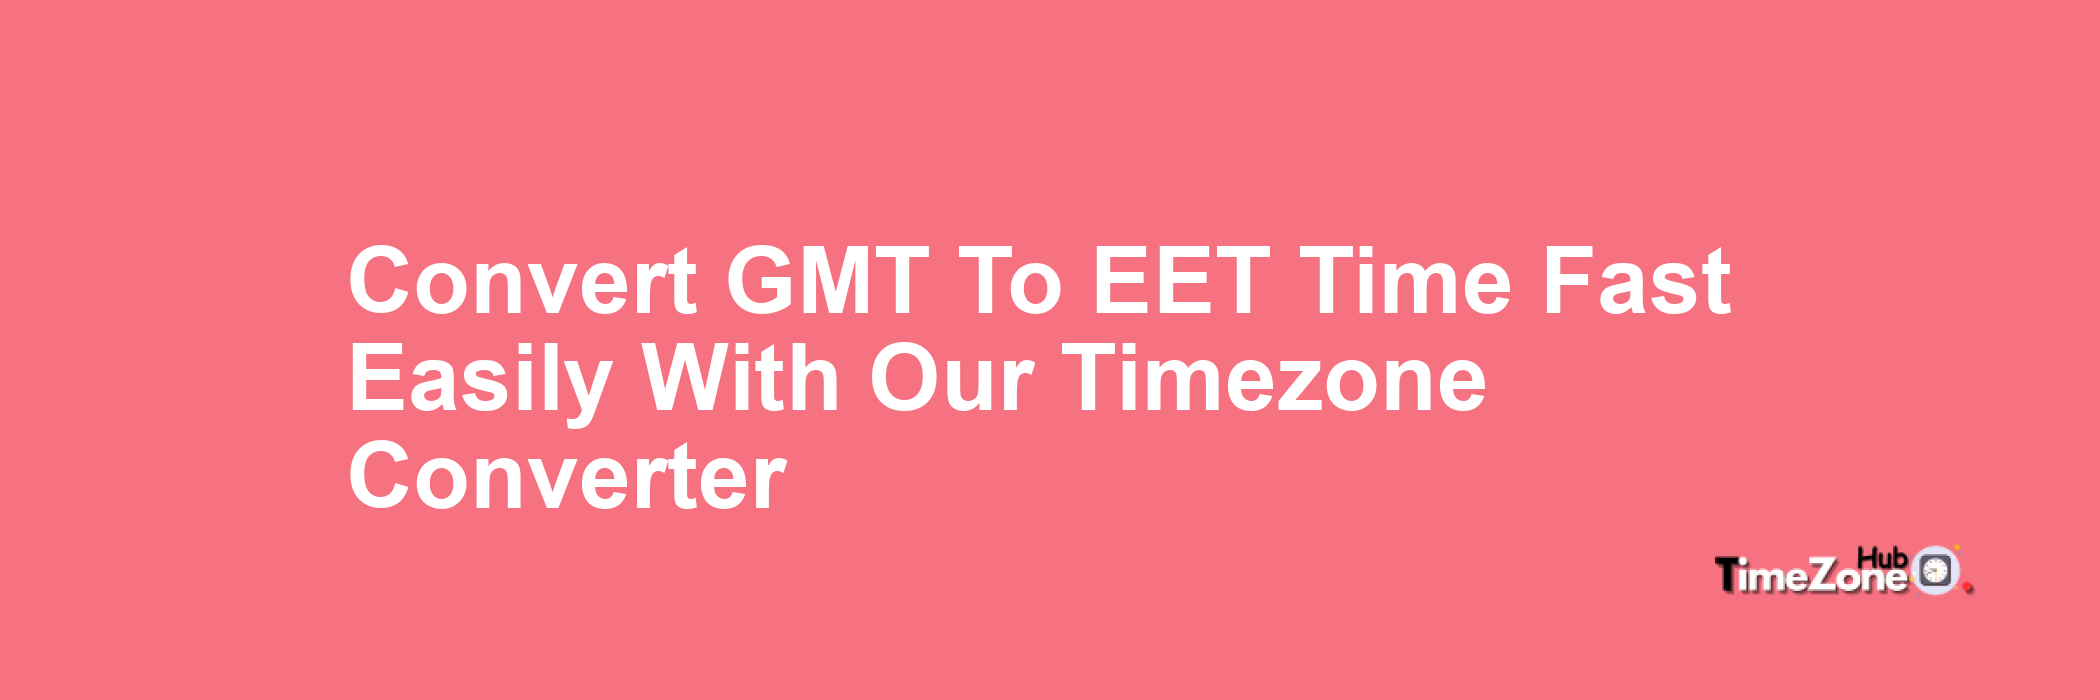 GMT to EET